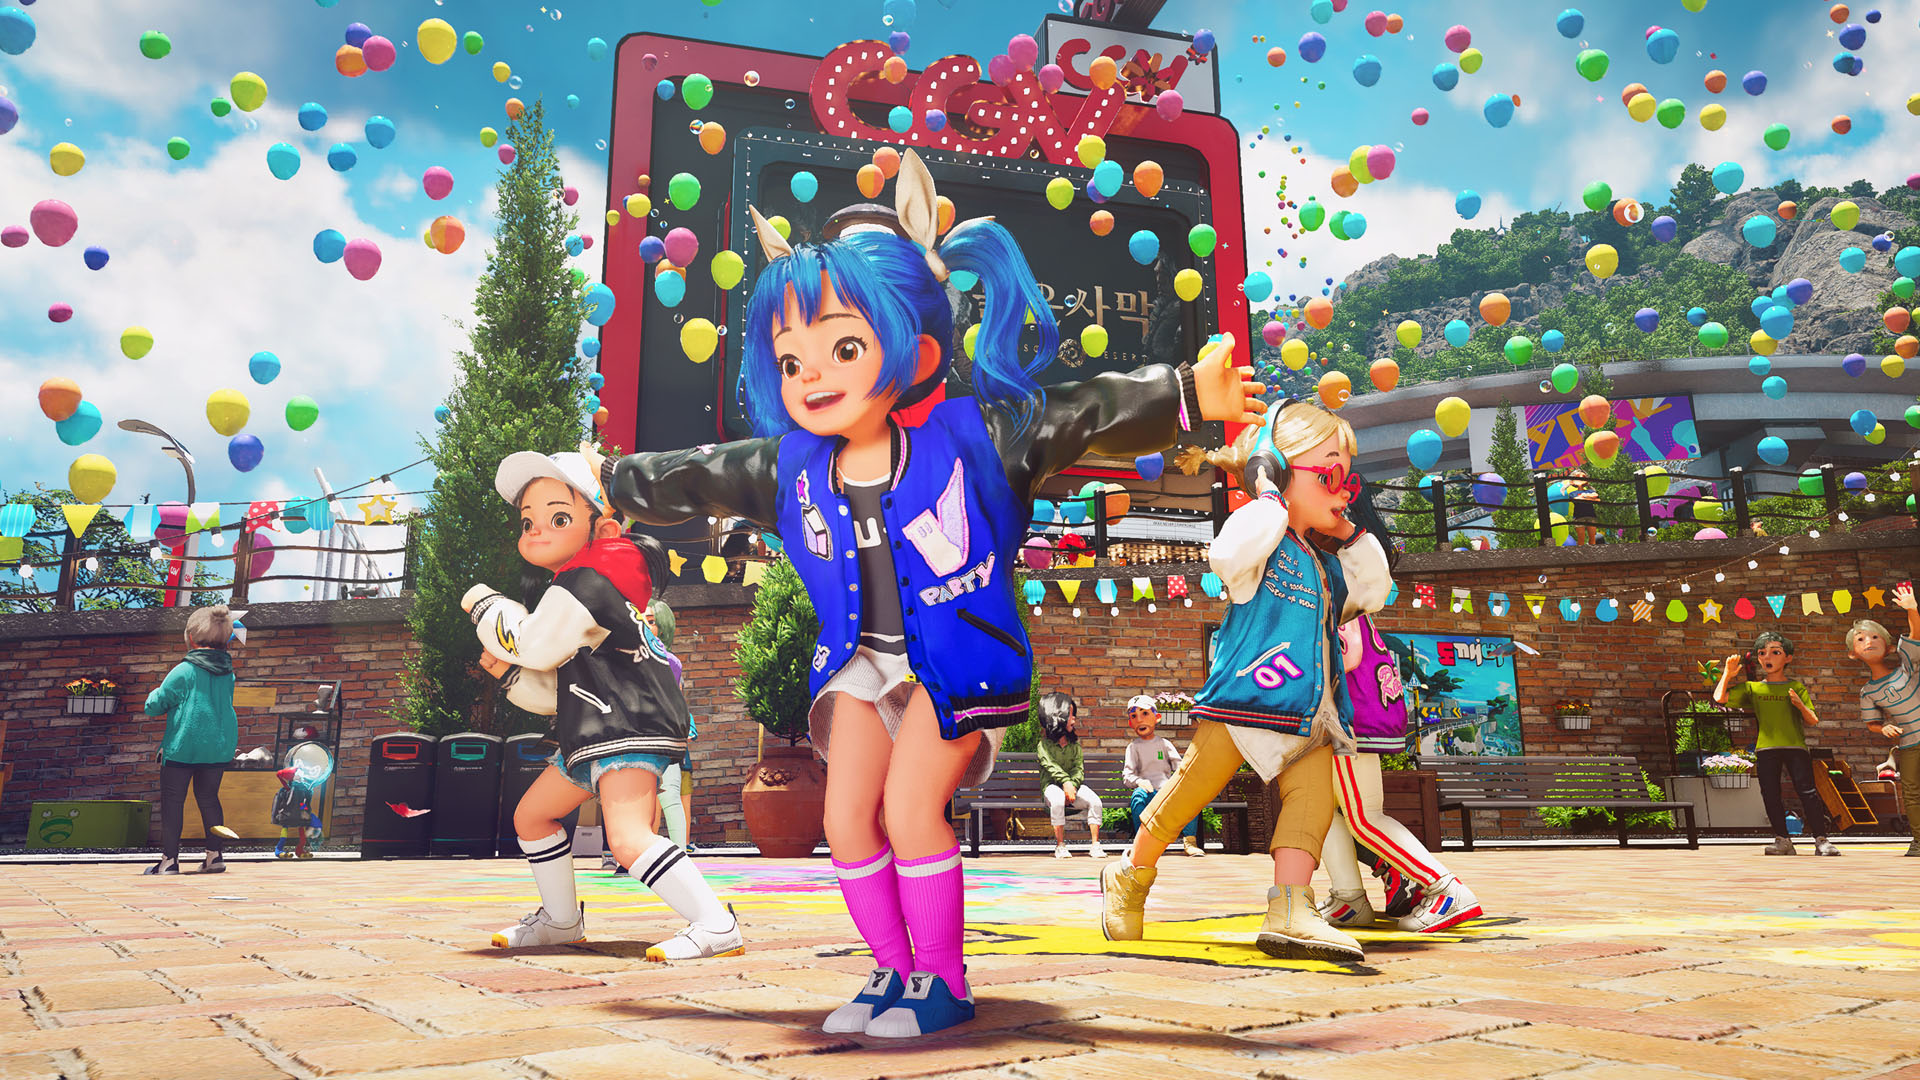 DokeV ROCKSTAR Music Video Shows Off Its Characters and World